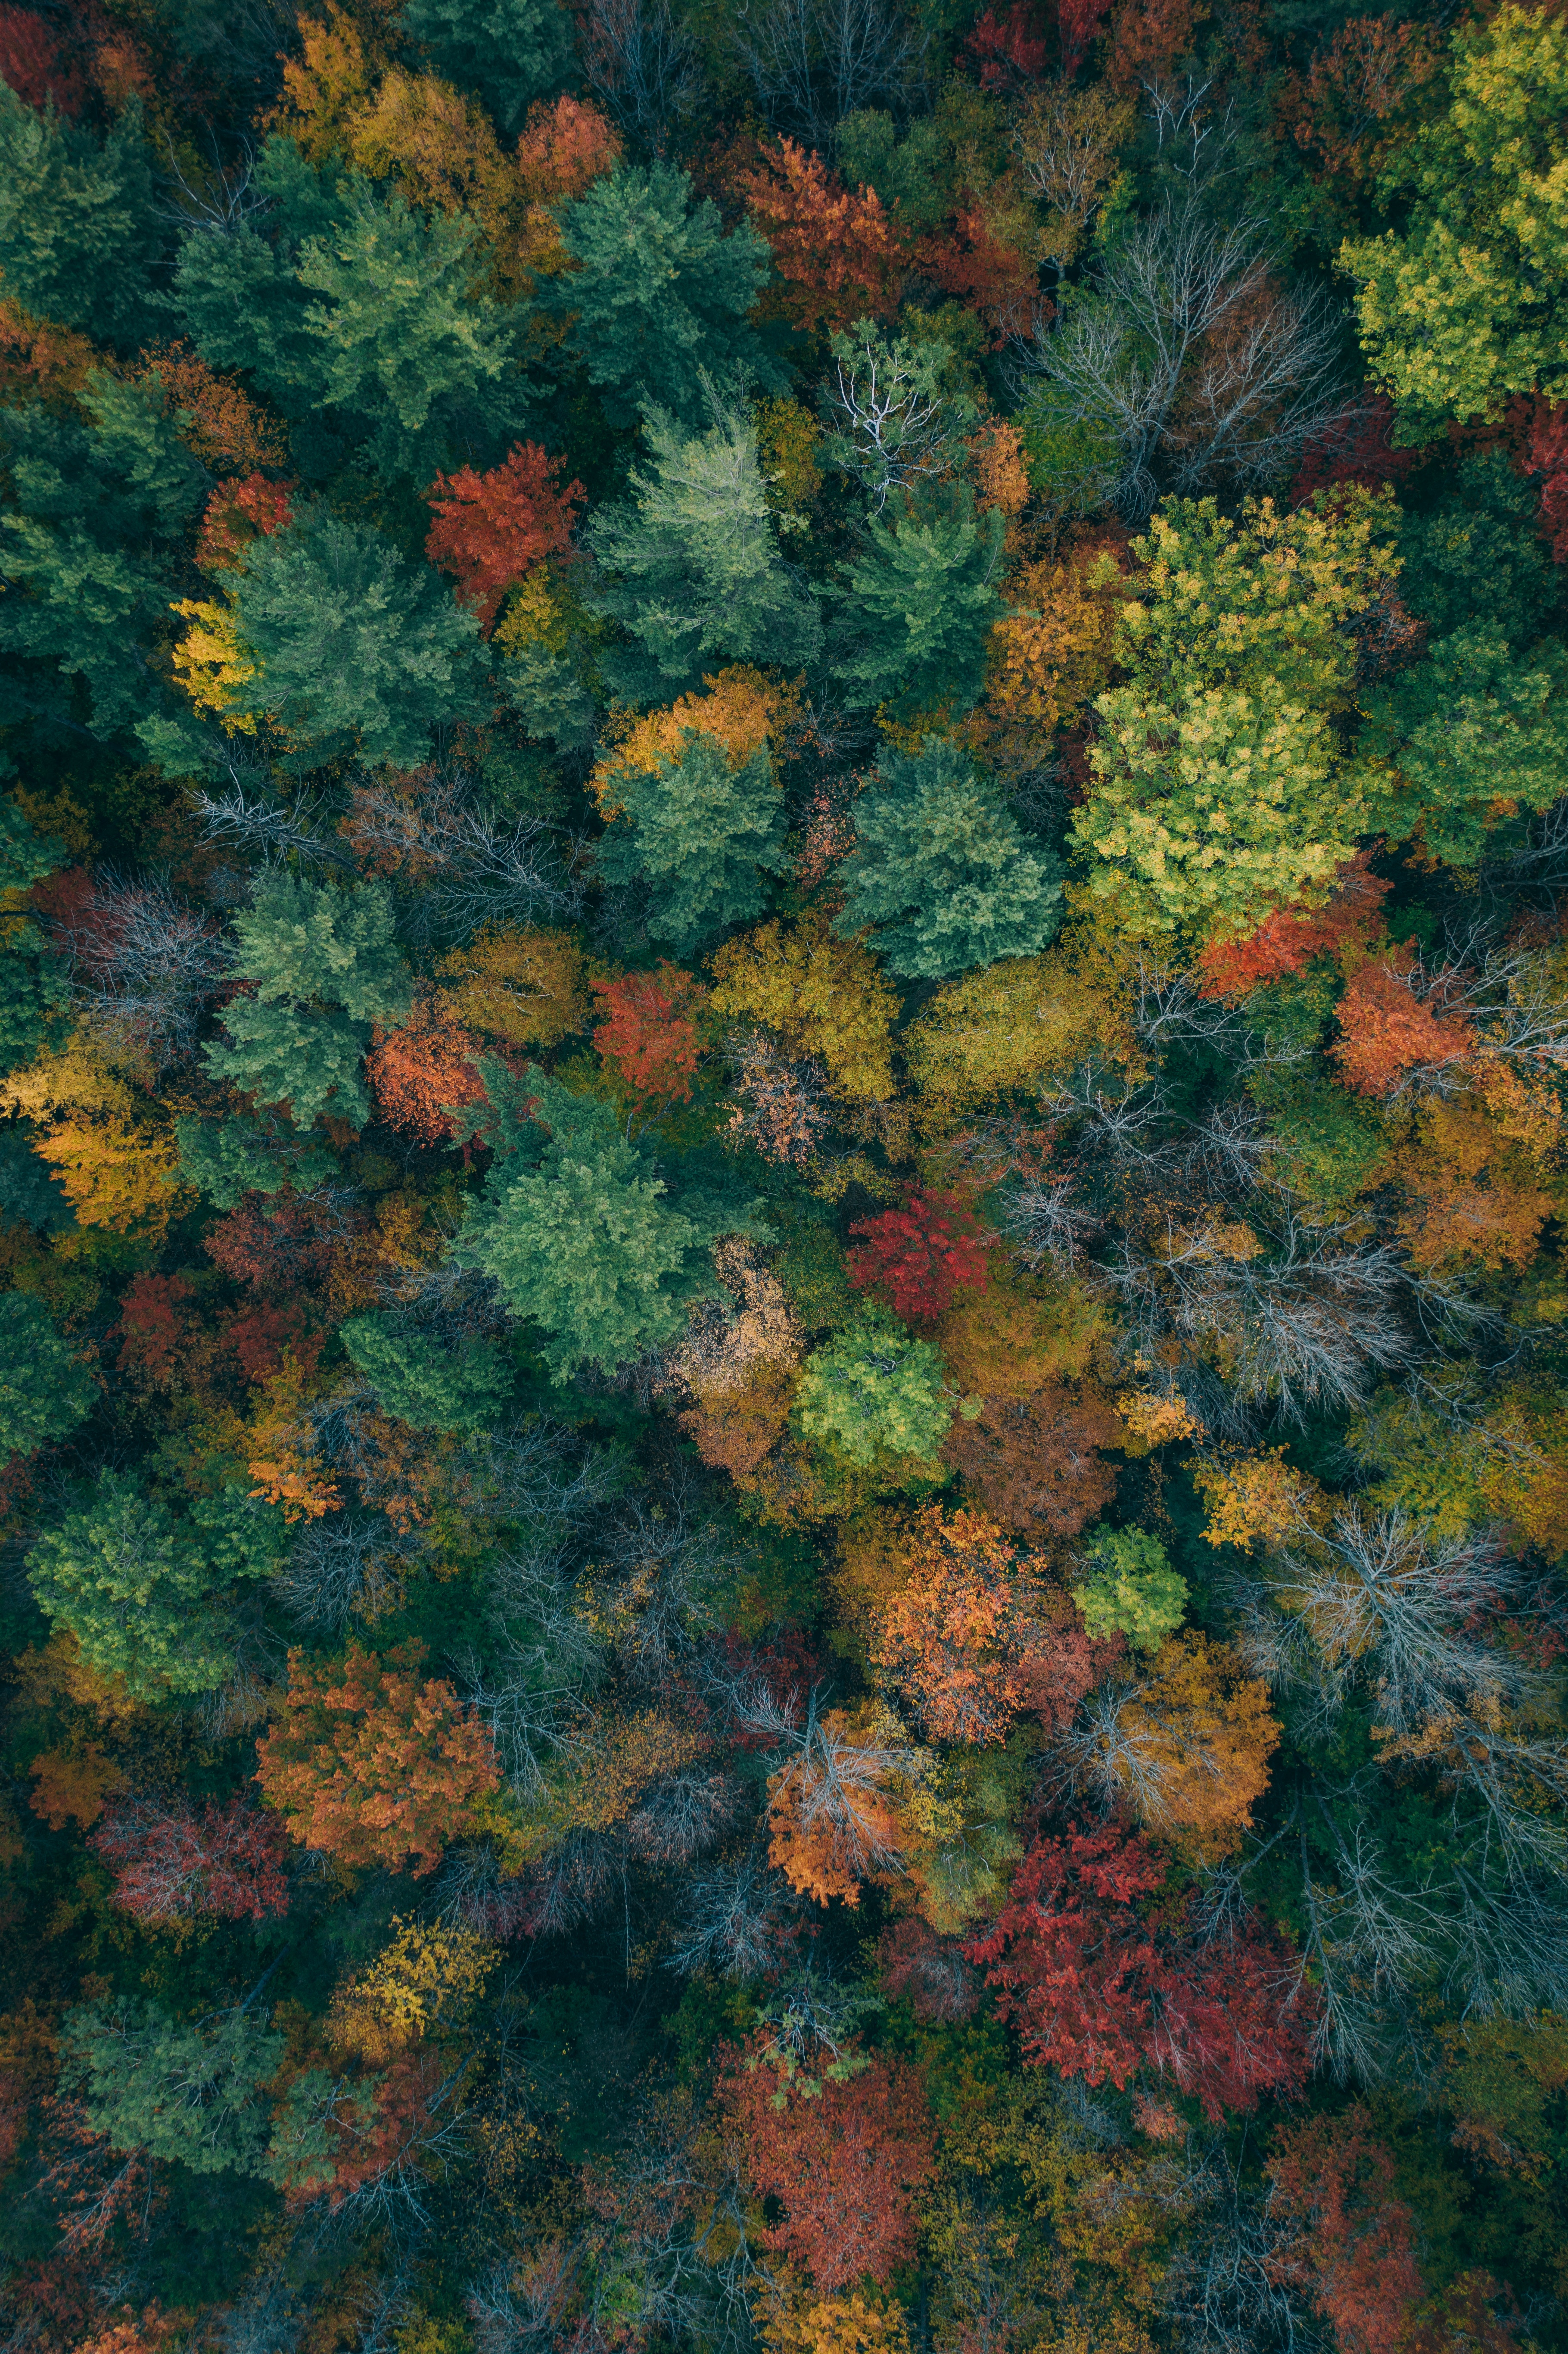 forest, colorful, autumn paints, nature, autumn colors, autumn, trees, view from above, colourful 32K